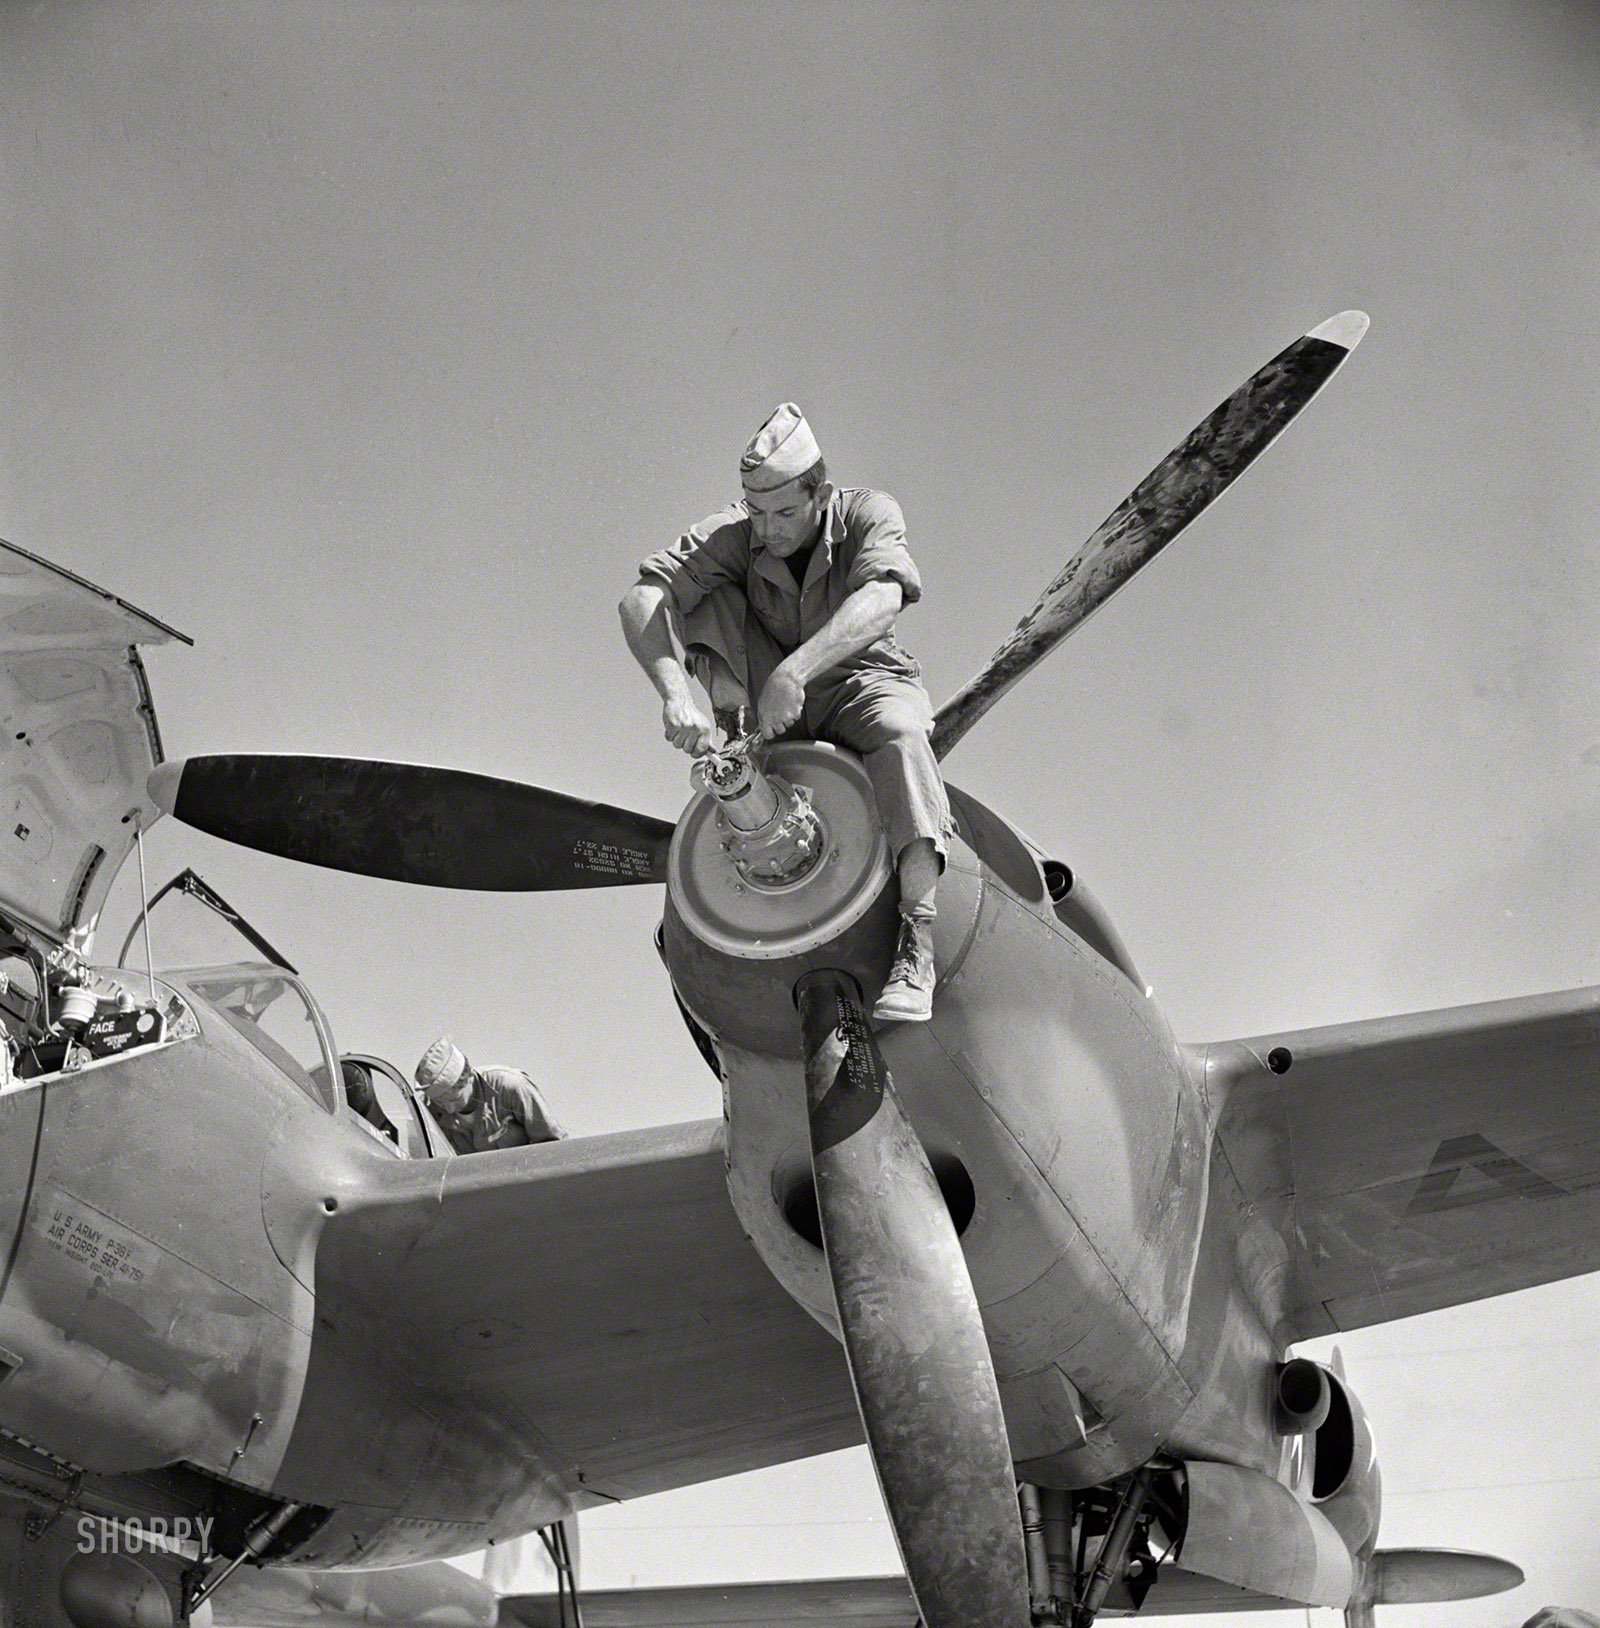 May 1942. "Working on the nose of an engine on an interceptor plane. Lake Muroc, California." Photo by Russell Lee for the OWI. View full size.